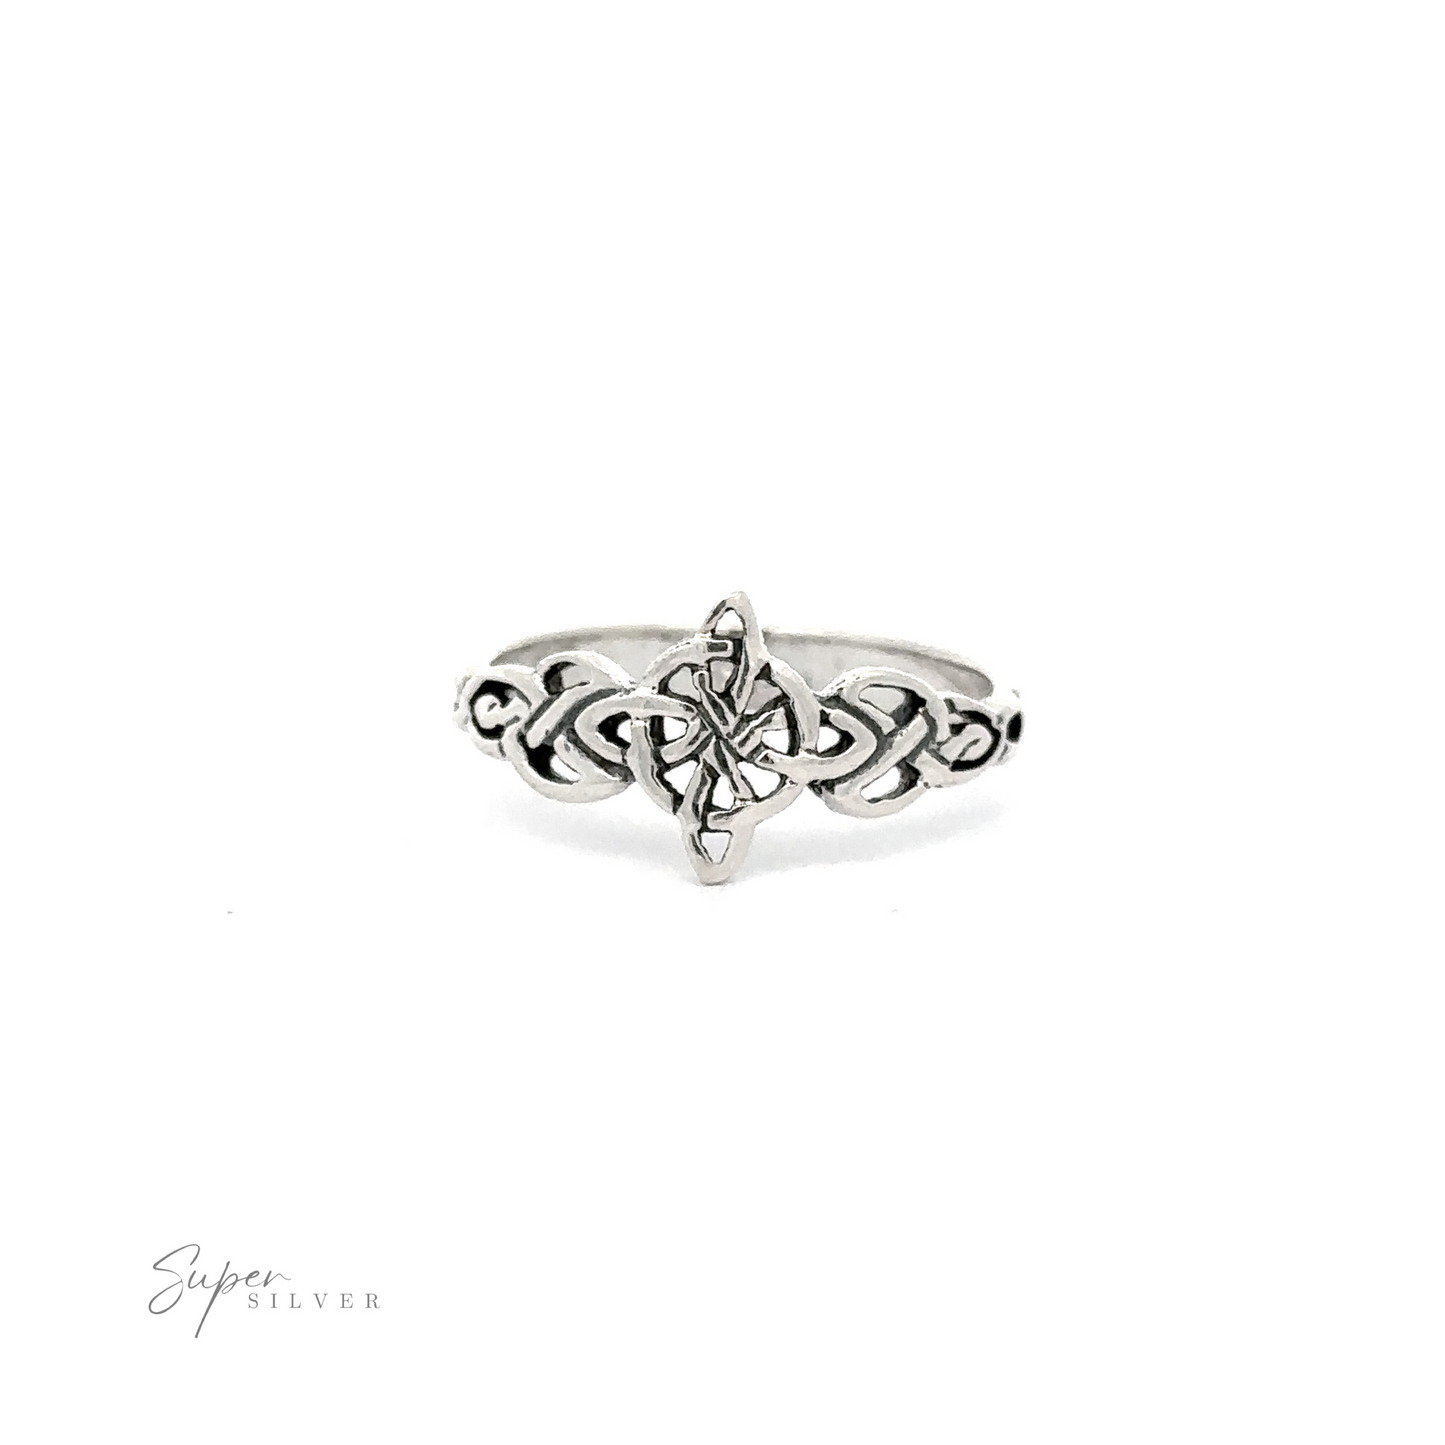 A Four Pointed Celtic Knot Ring, symbolizing timeless beauty and rich heritage, crafted in sterling silver with an ornate design.